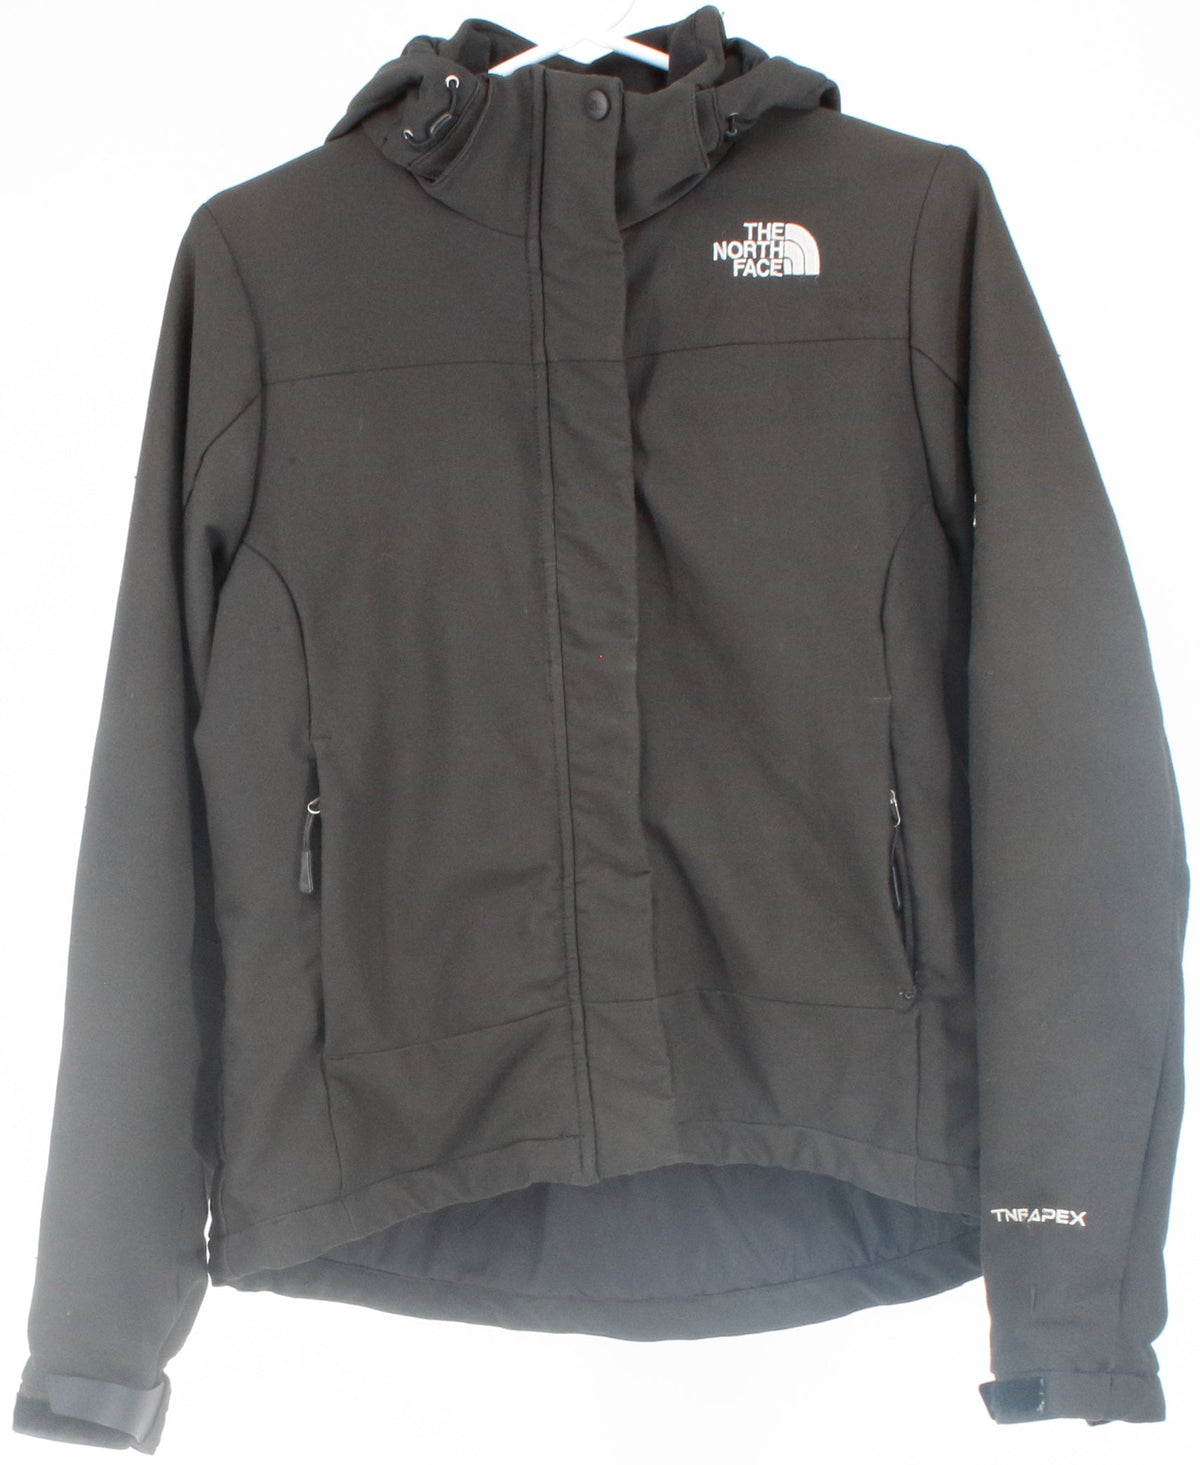 The North Face Hooded Women's Jacket